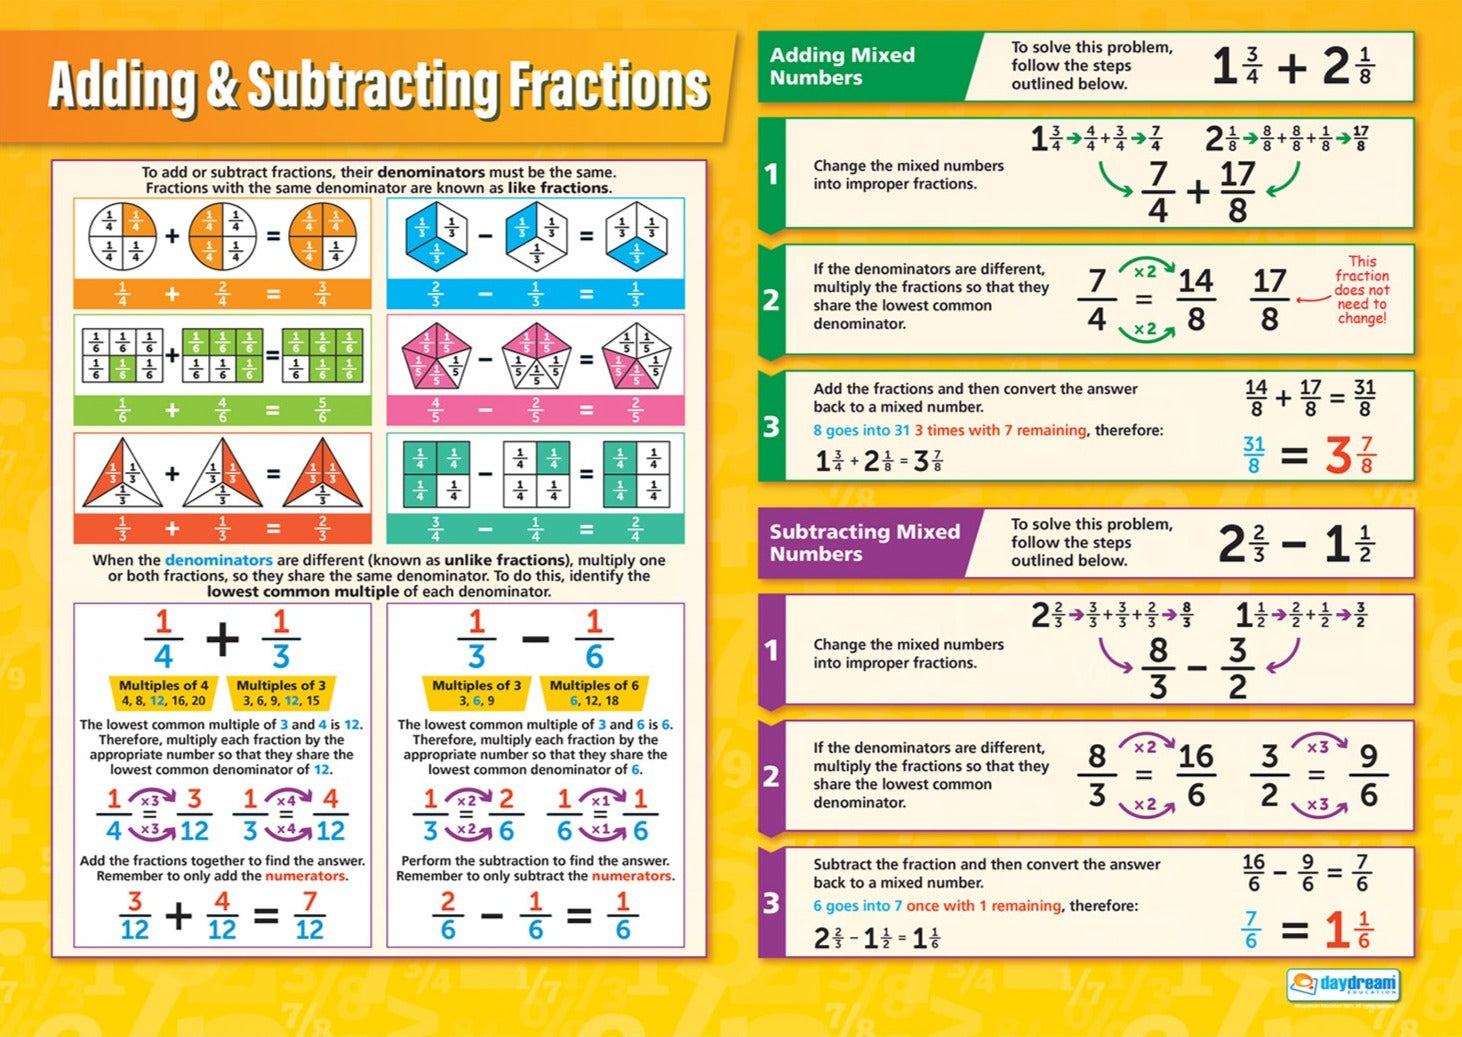 Adding & Subtracting Fractions Poster, Maths Posters, Maths Charts for the Classroom, Maths Education Charts, Educational School Posters, Classroom Posters, Perfect for Maths Teachers, Maths Classroom, Column Method, Maths Education, Learning Resource, Visual Learning, Classroom Decor, Maths Strategies